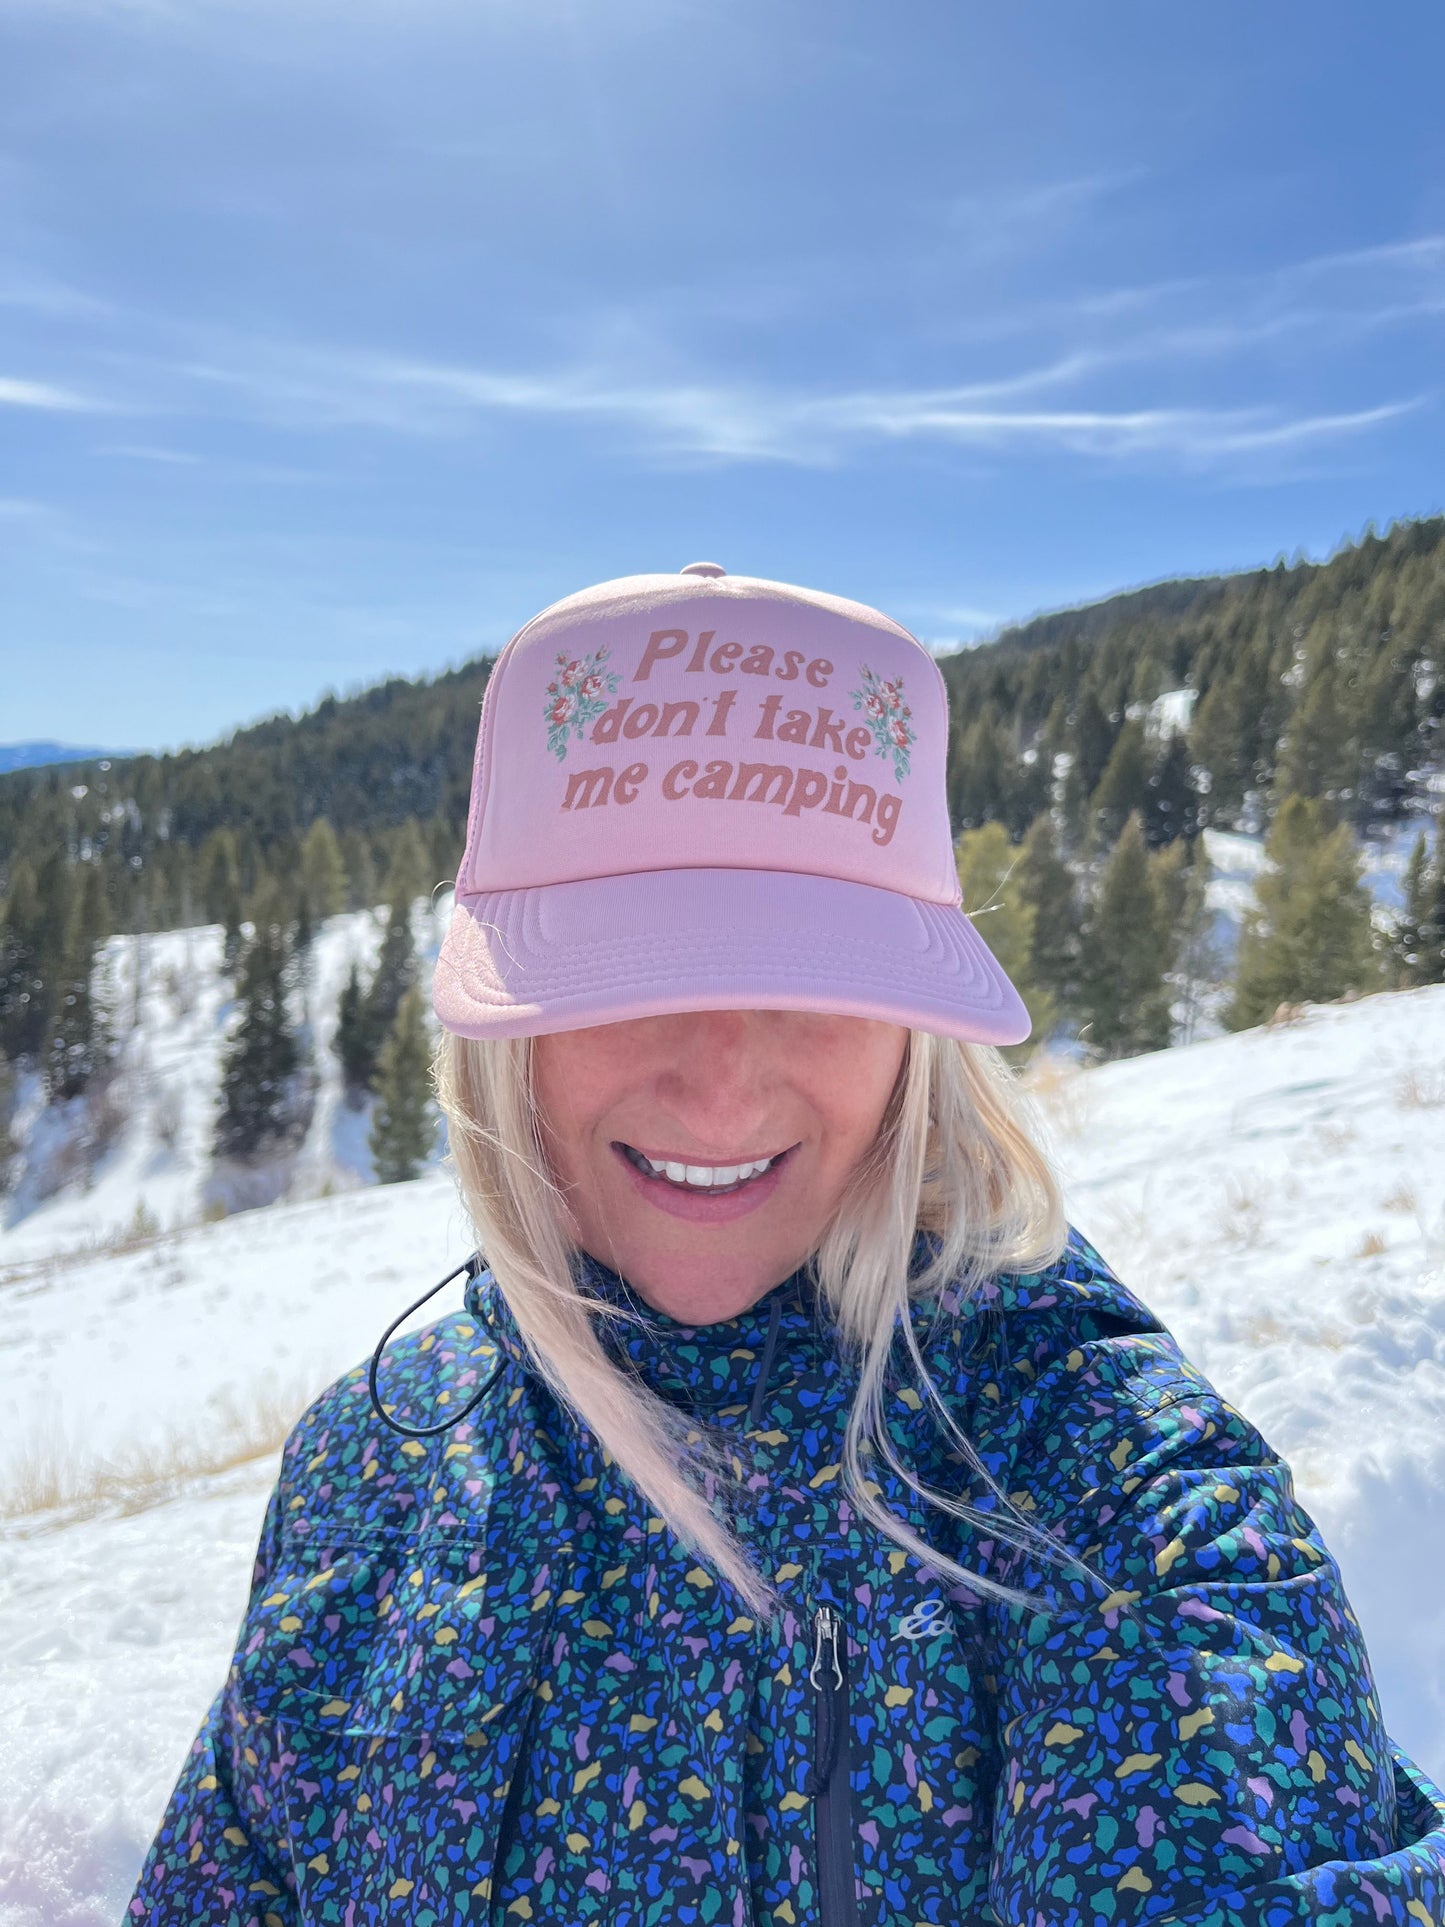 camping funny trucker hat pink with flowers cute fun hat retro floral print camp dont take me camping montana bozeman coin laundry pink mesh back hat outdoors hiking backcountry 